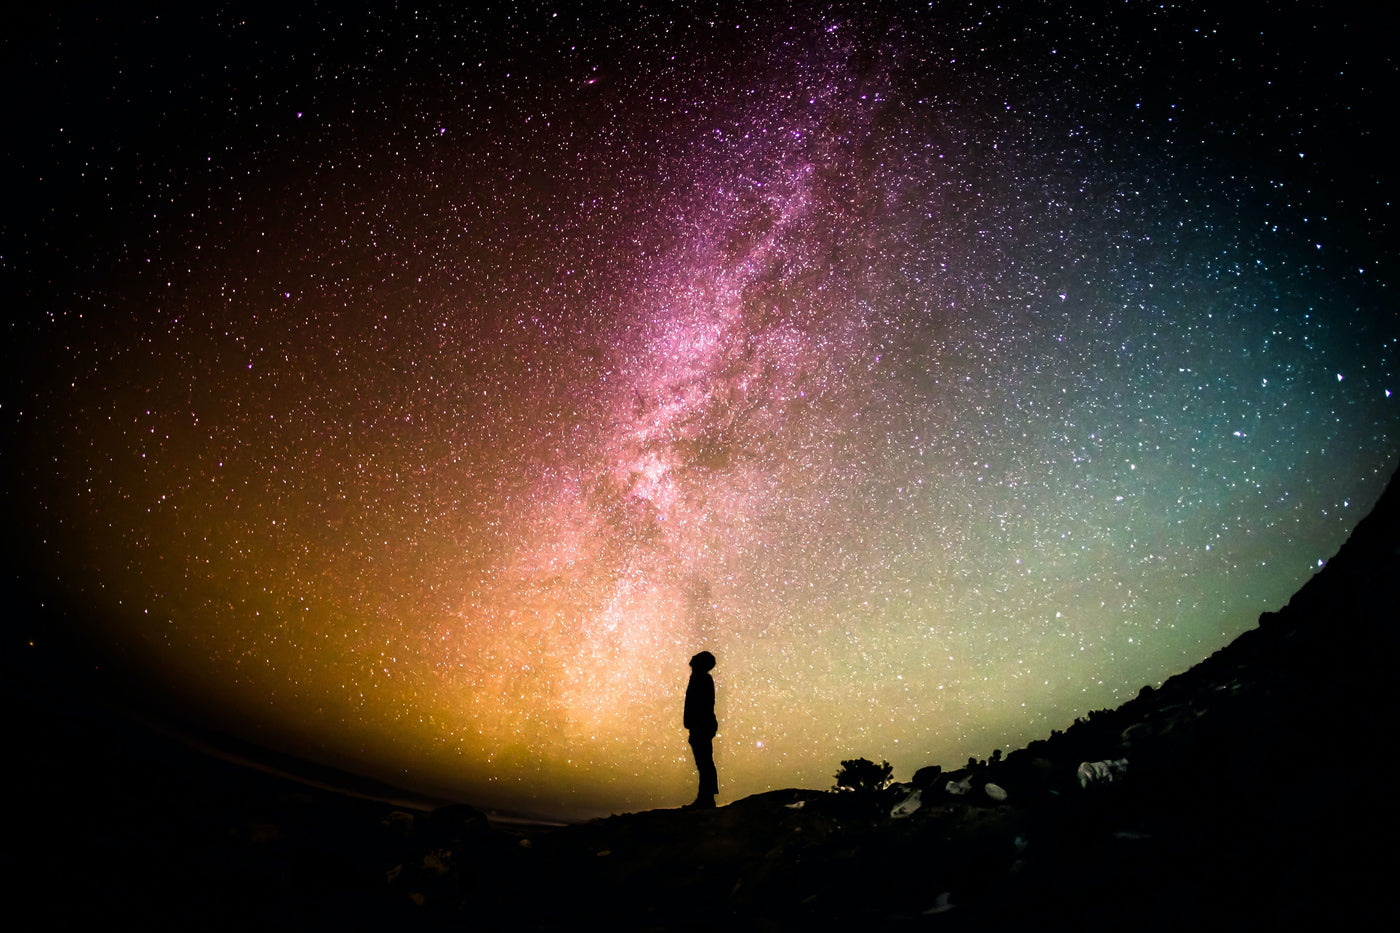 Man silhouette looking at a colorful star filled sky with purple milky way with fisheye lense 